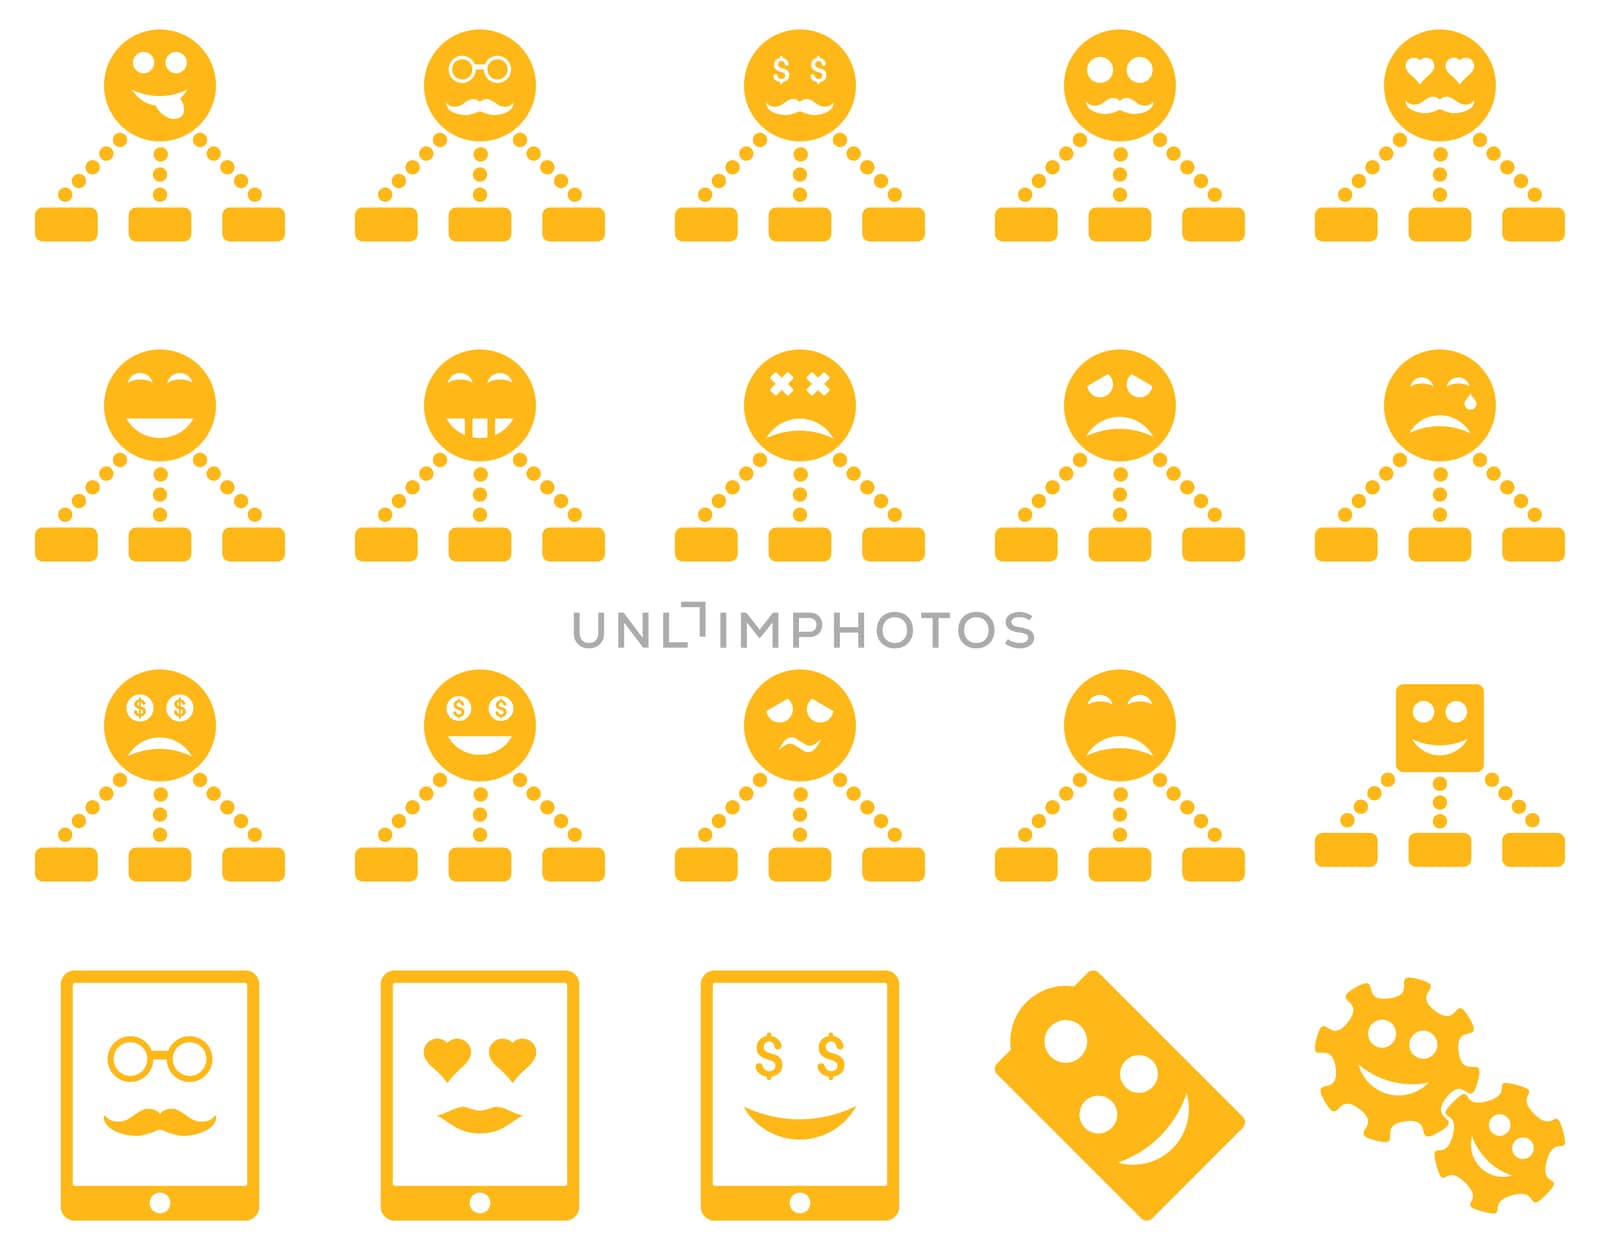 Smile, emotion, relations and tablet icons. Glyph set style is flat images, yellow symbols, isolated on a white background.